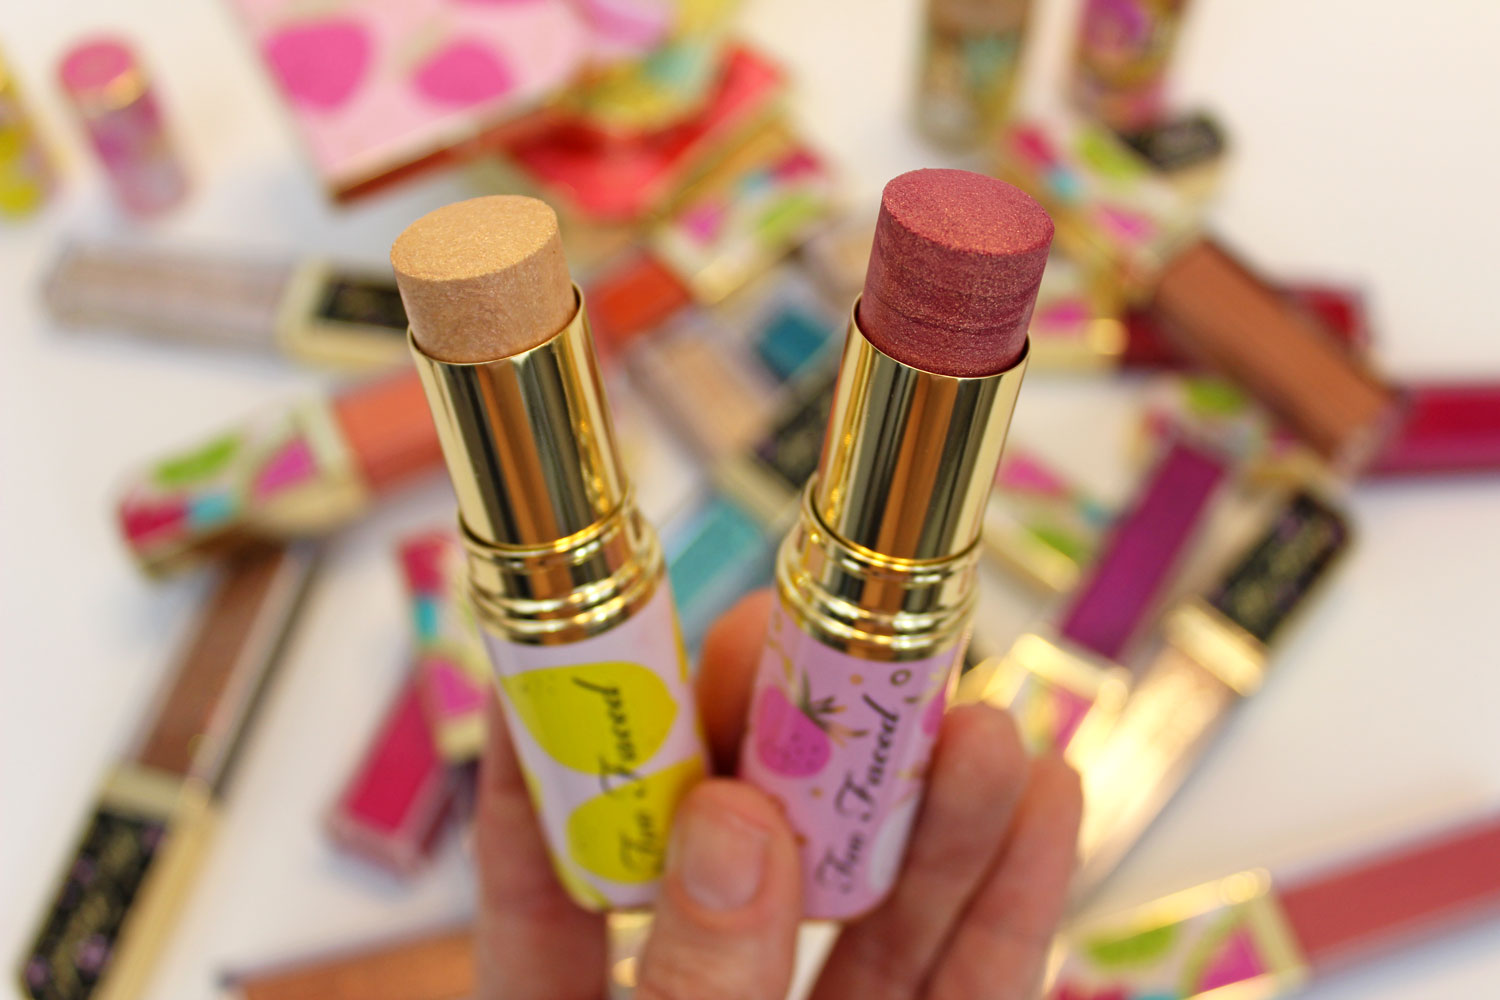 Too Faced Tutti Frutti Frosted Fruits Highlighter Sticks review and swatches by cruelty free blog My Beauty Bunny